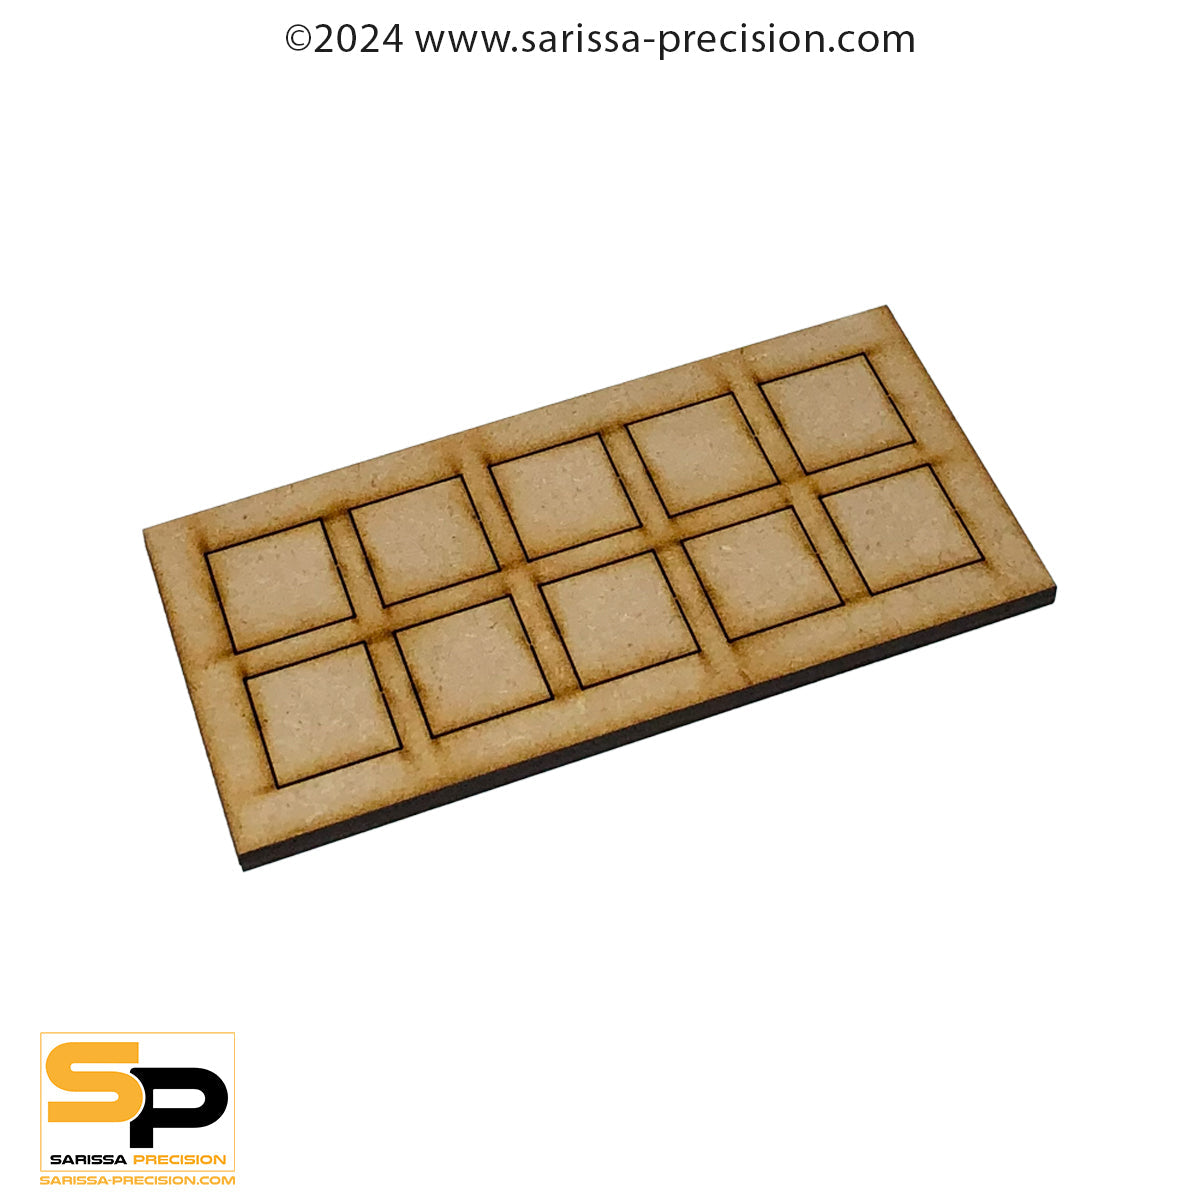 7x6 25x25mm Conversion Tray for 20x20mm bases